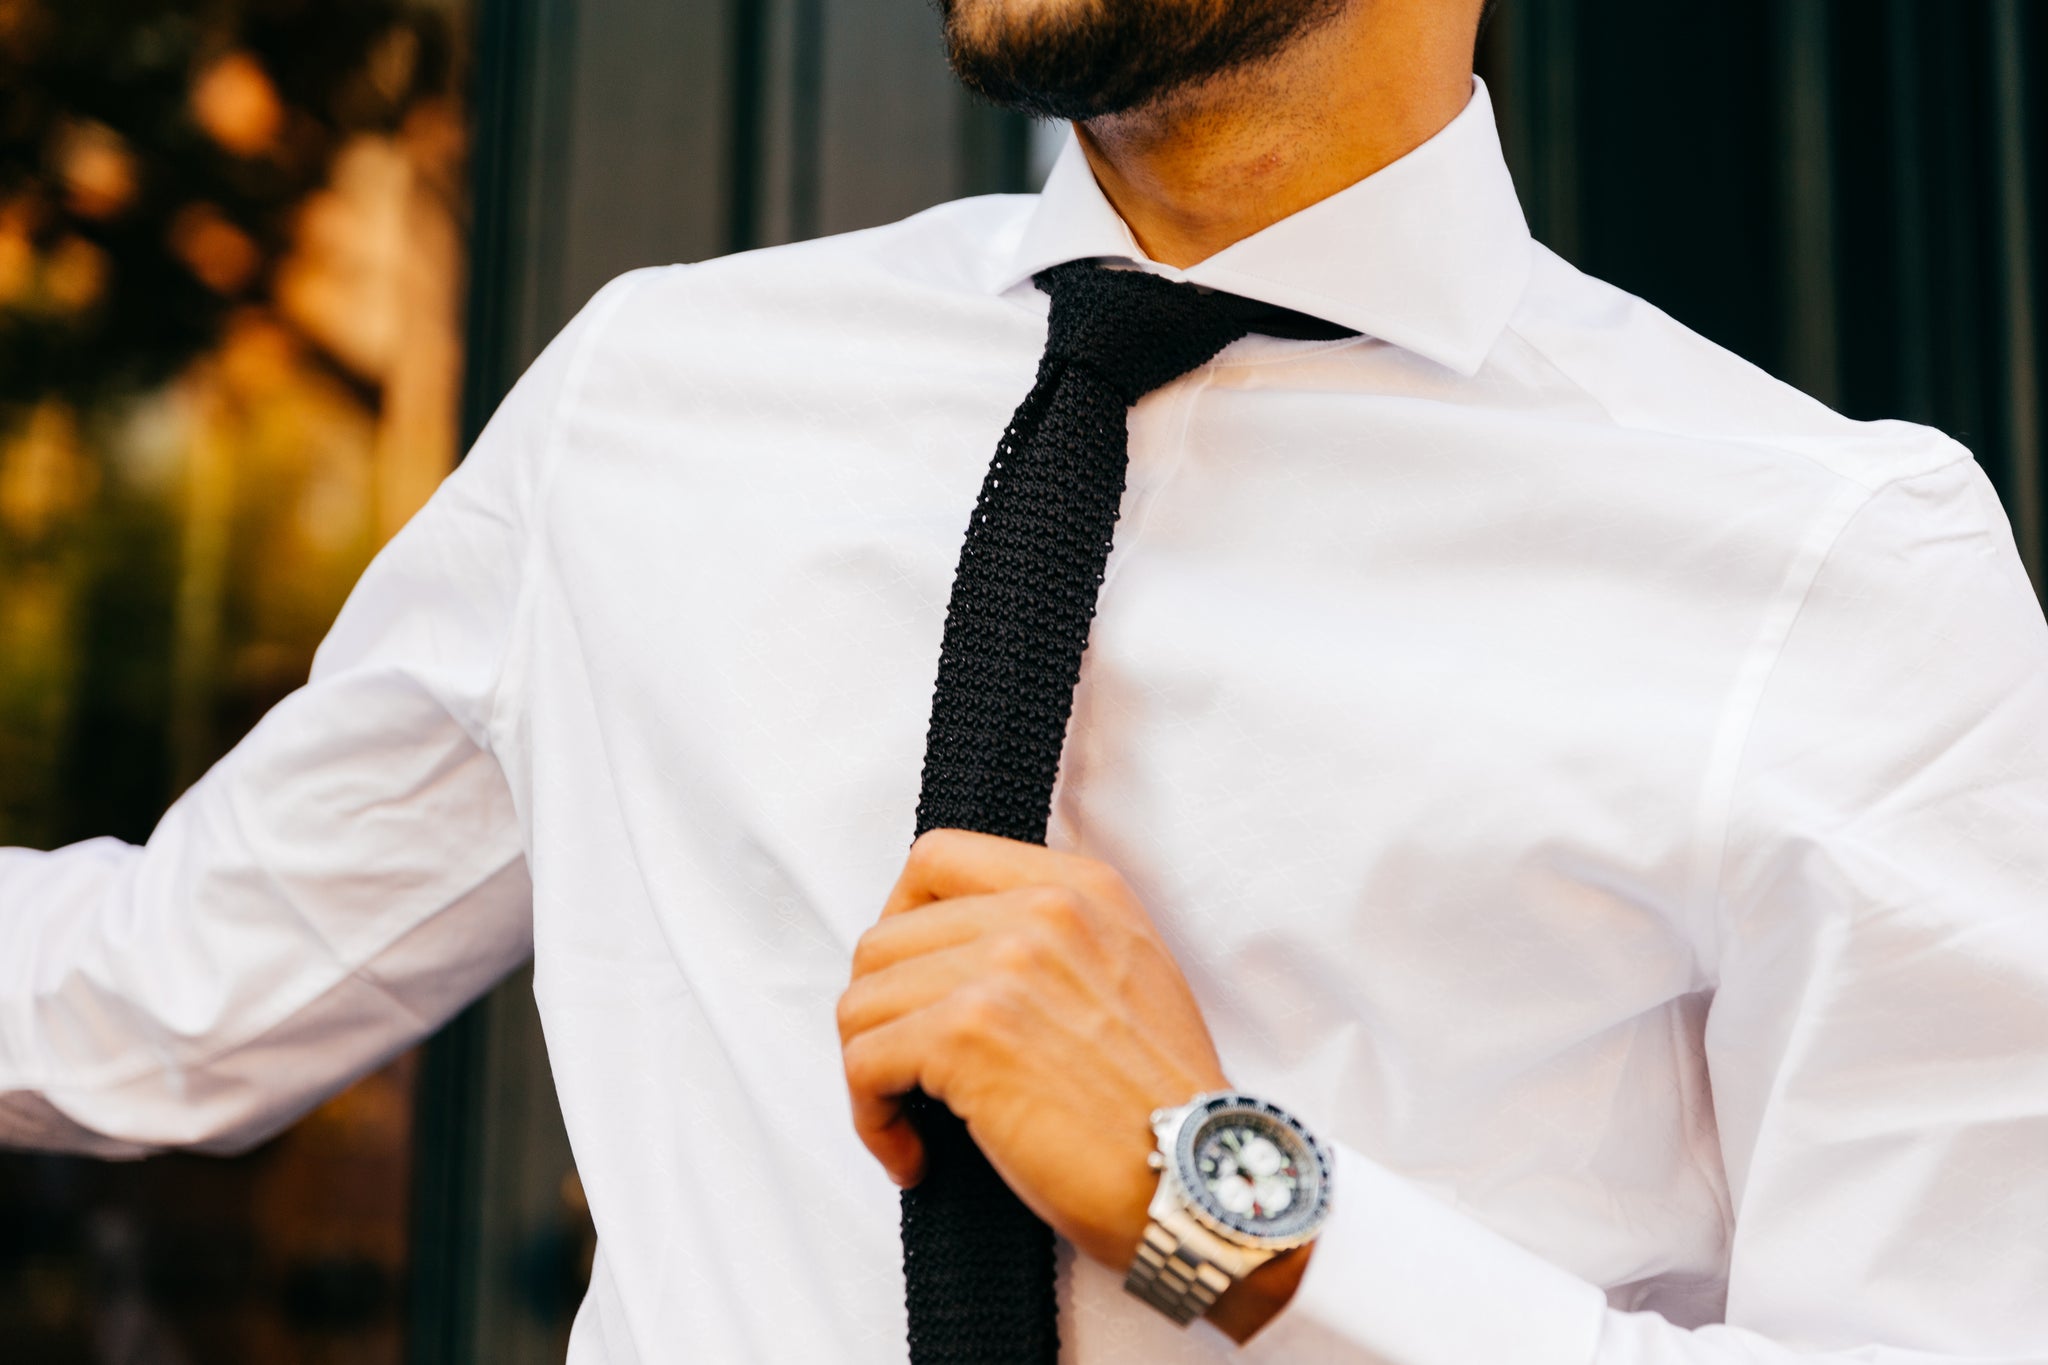 White Dress Shirts: What Are the Best Quality, How to Fold and Where to Buy